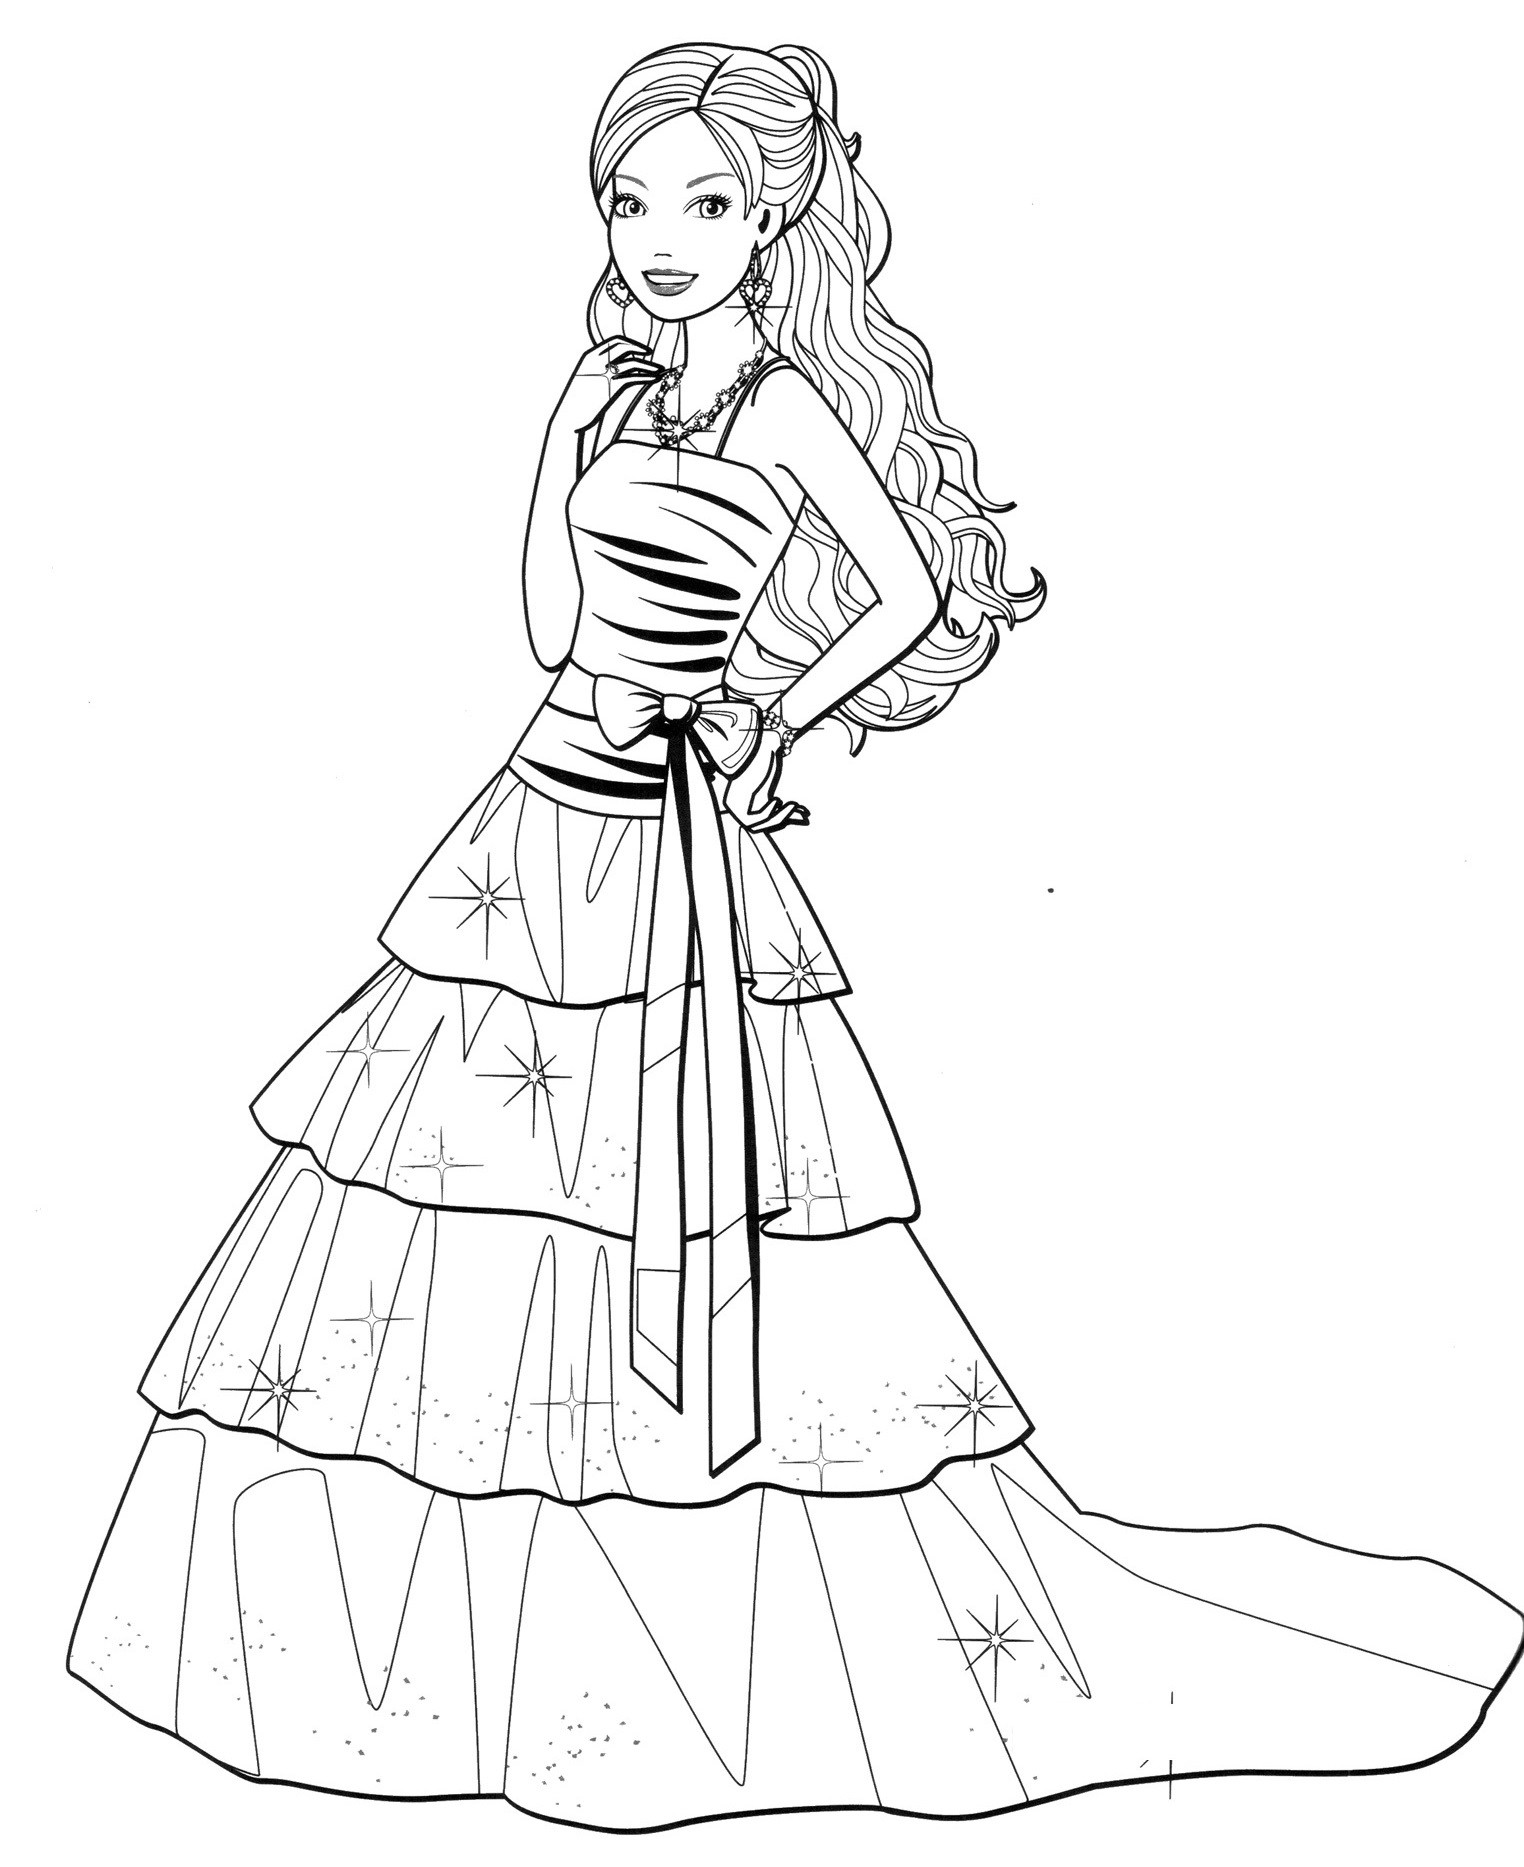 barbie dress coloring page for girls beautiful fashion dress coloring pages for your little girls coloring pages